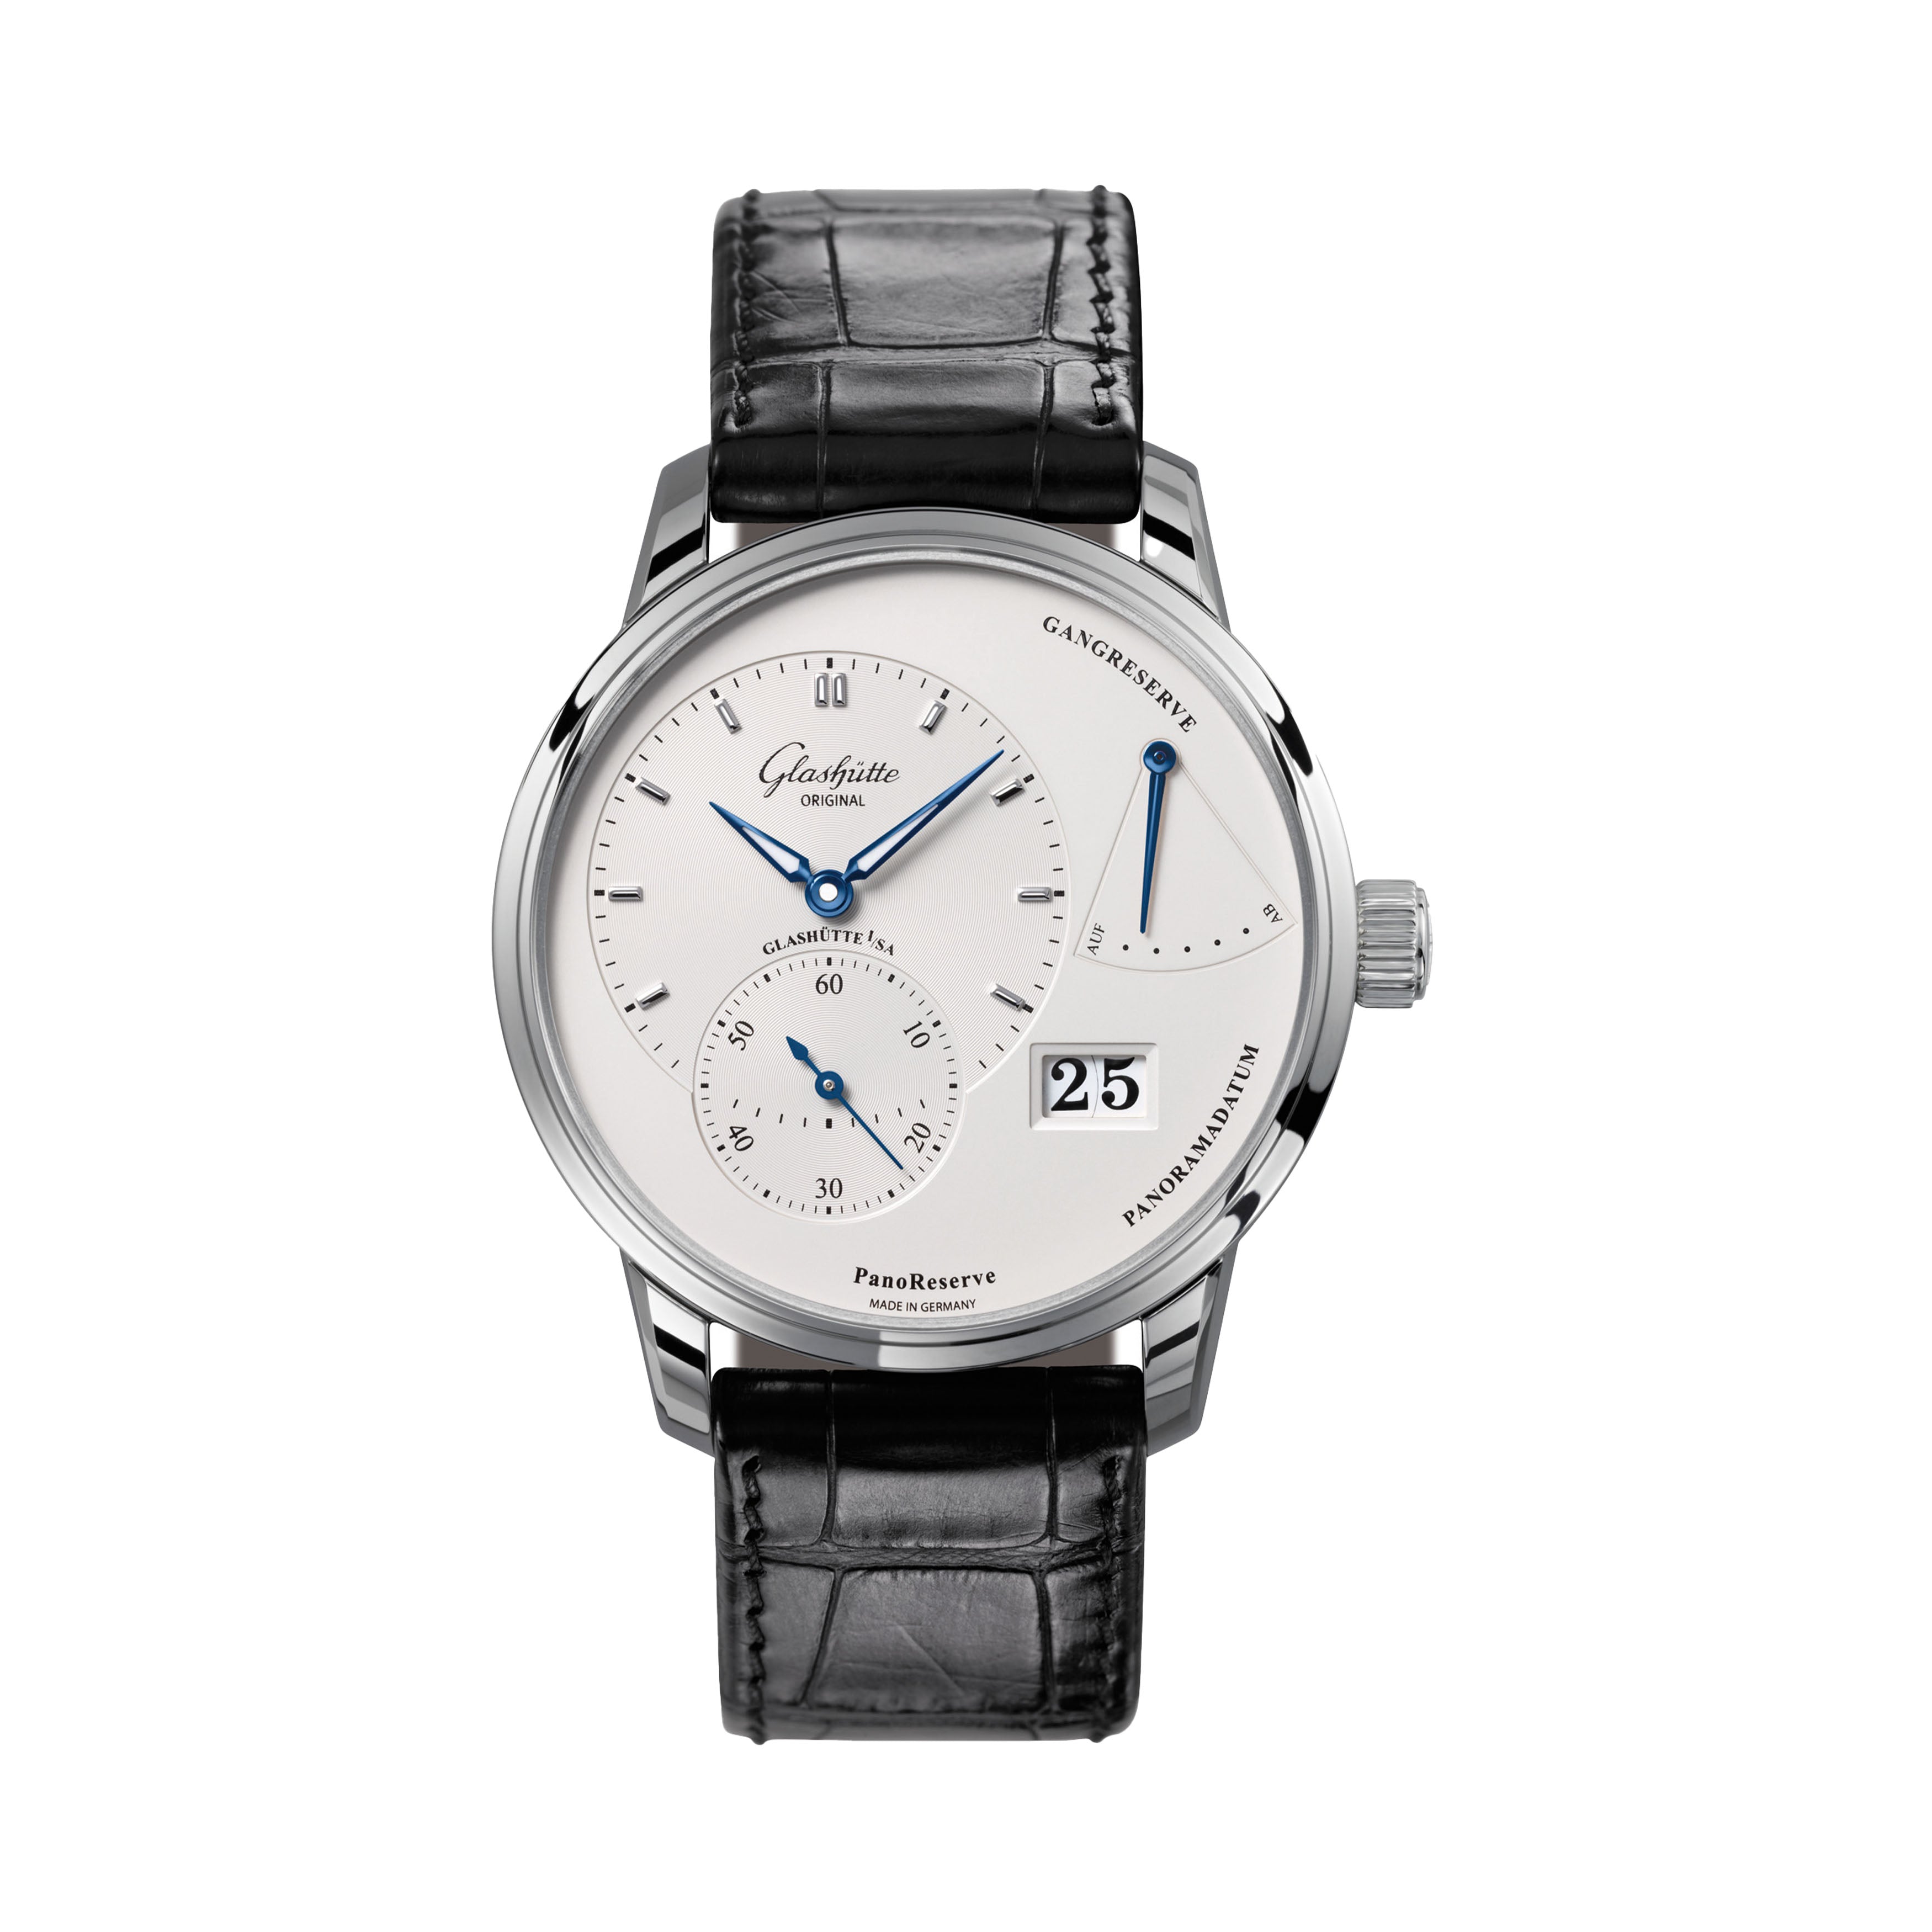 Glashutte Original PanoReserve Watch, 40mm Silver Dial, 1-65-01-22-12-61